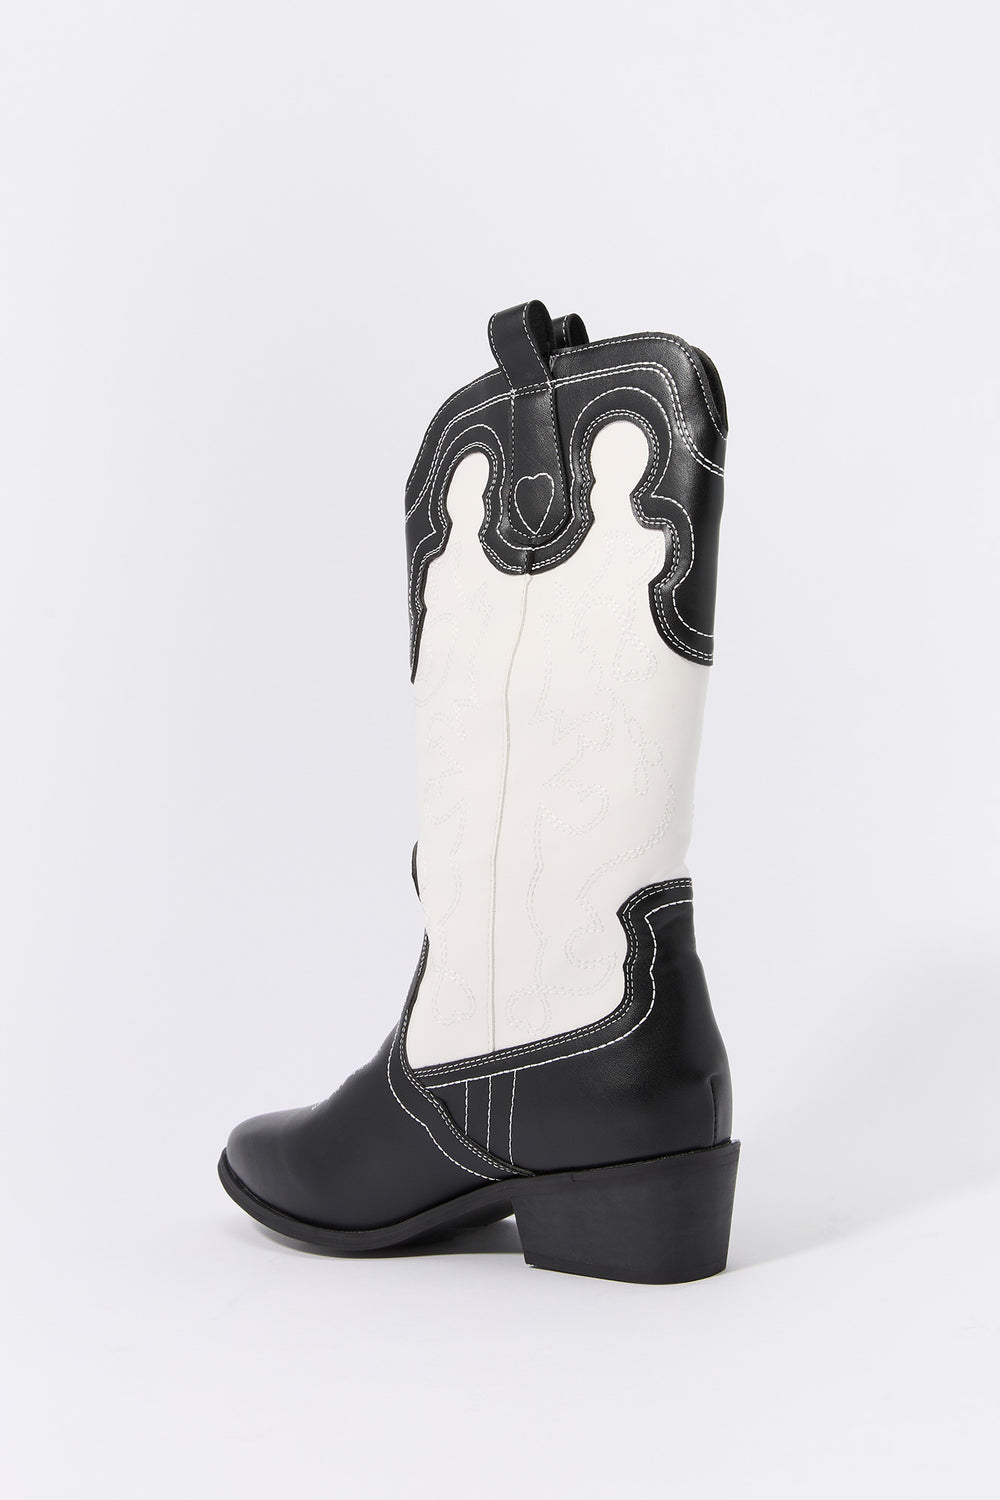 Black and White Cowboy Boot Black and White Cowboy Boot 3